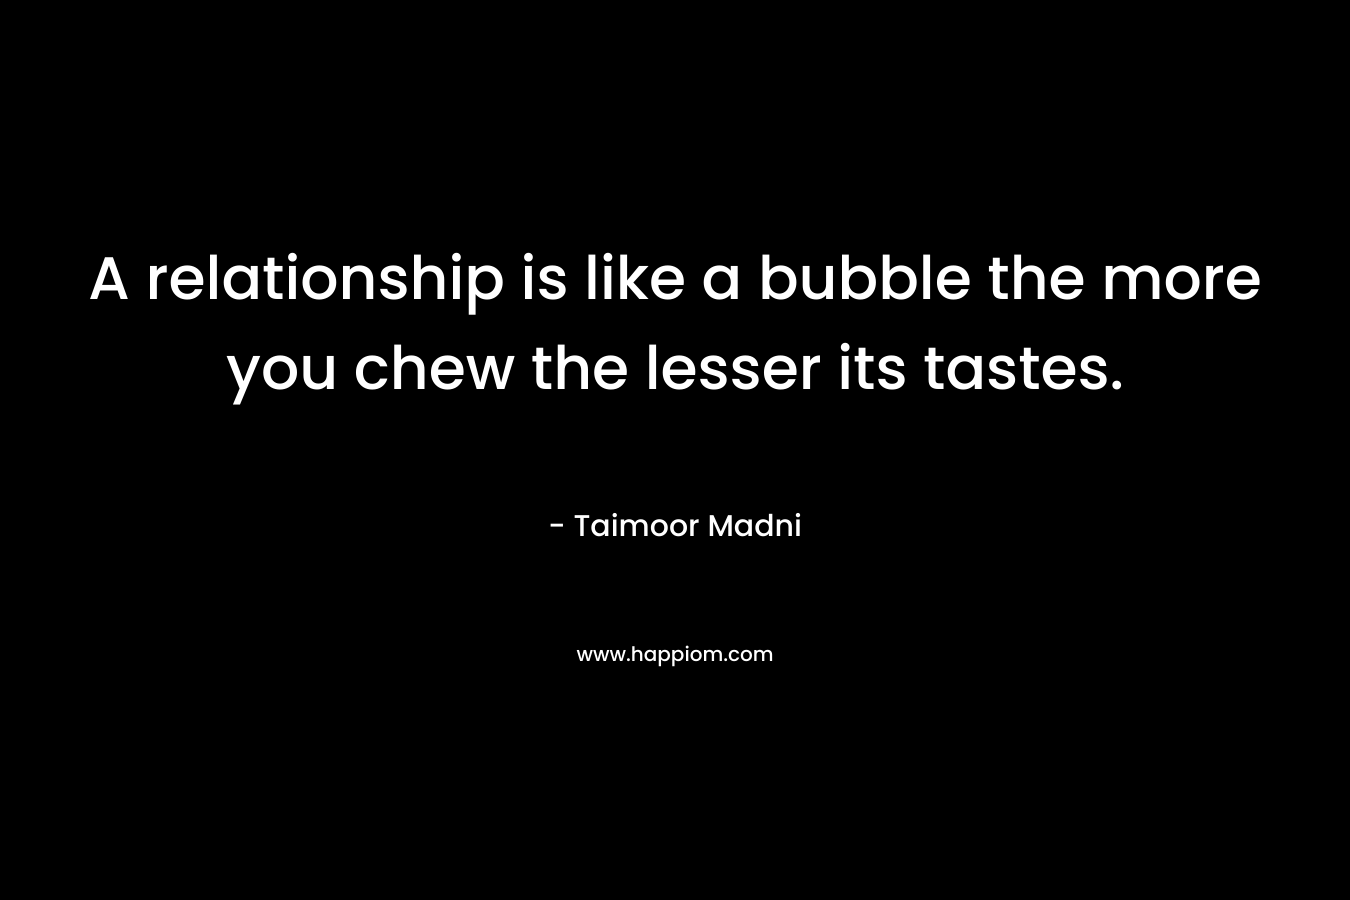 A relationship is like a bubble the more you chew the lesser its tastes. – Taimoor Madni